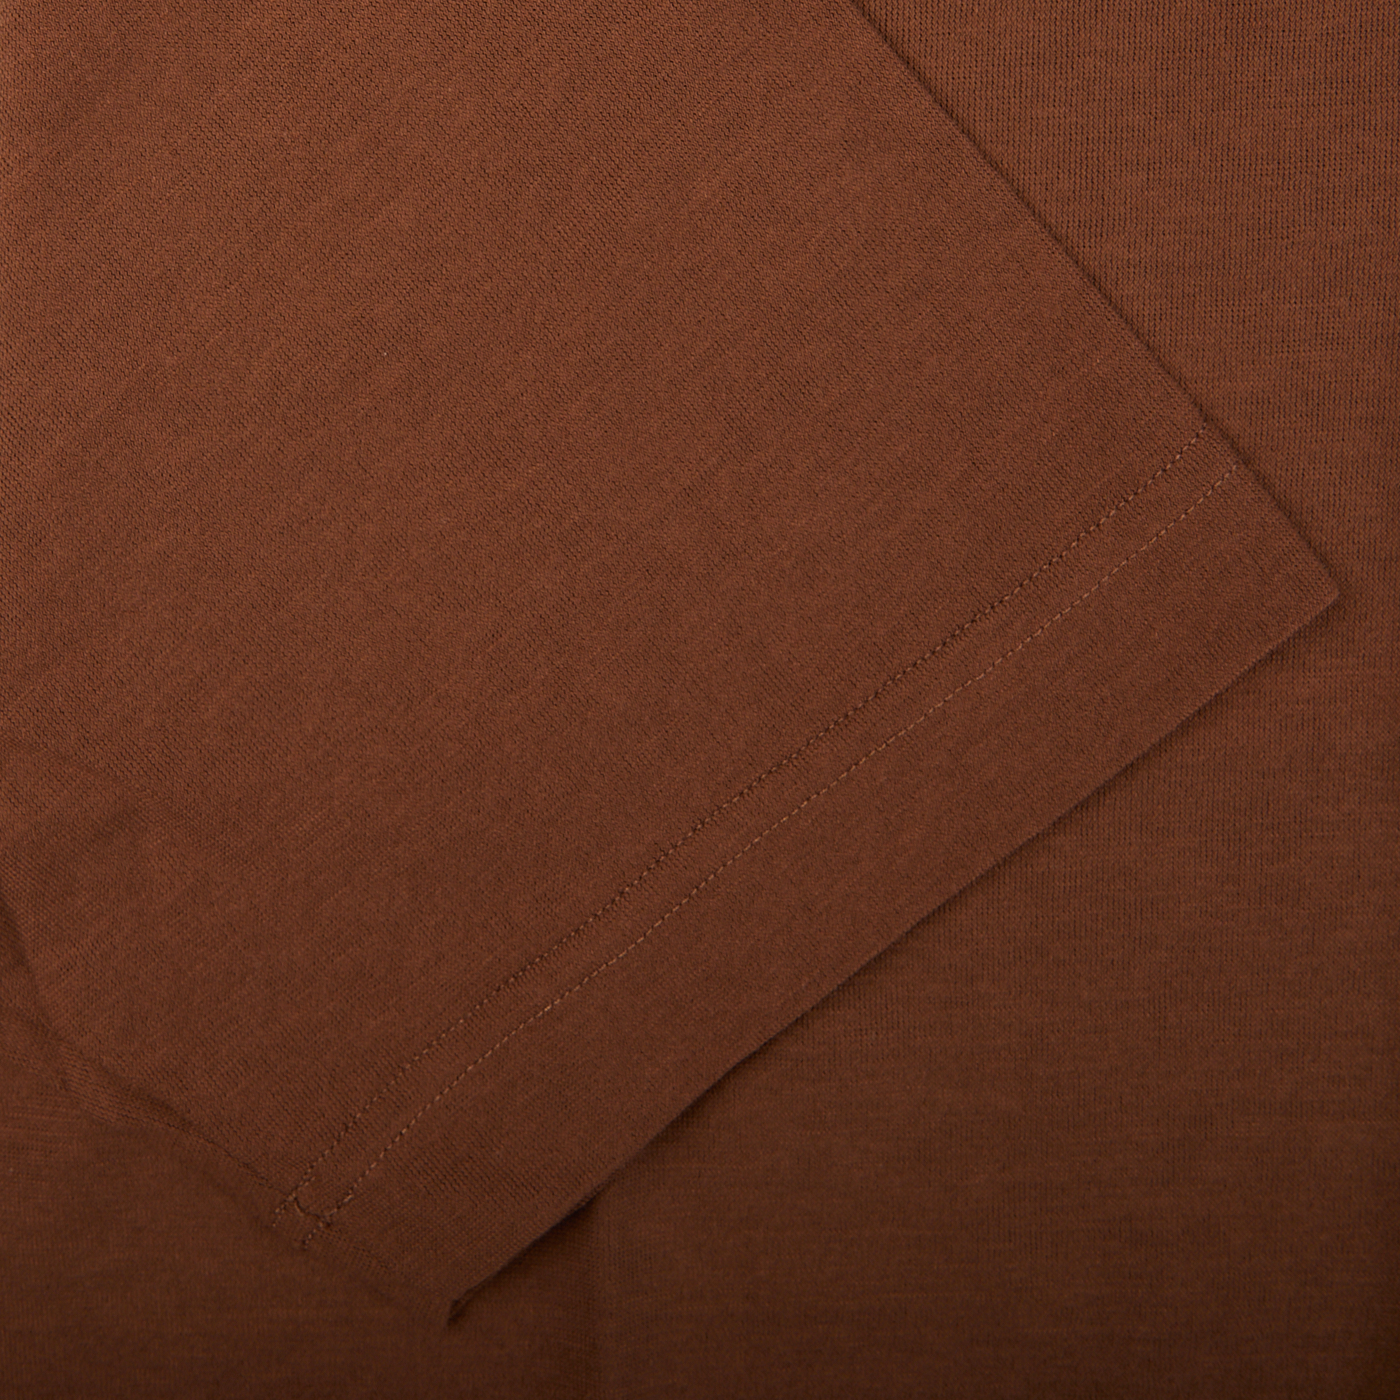 A Coffee Brown Ice Cotton Zanone polo shirt on a white background.